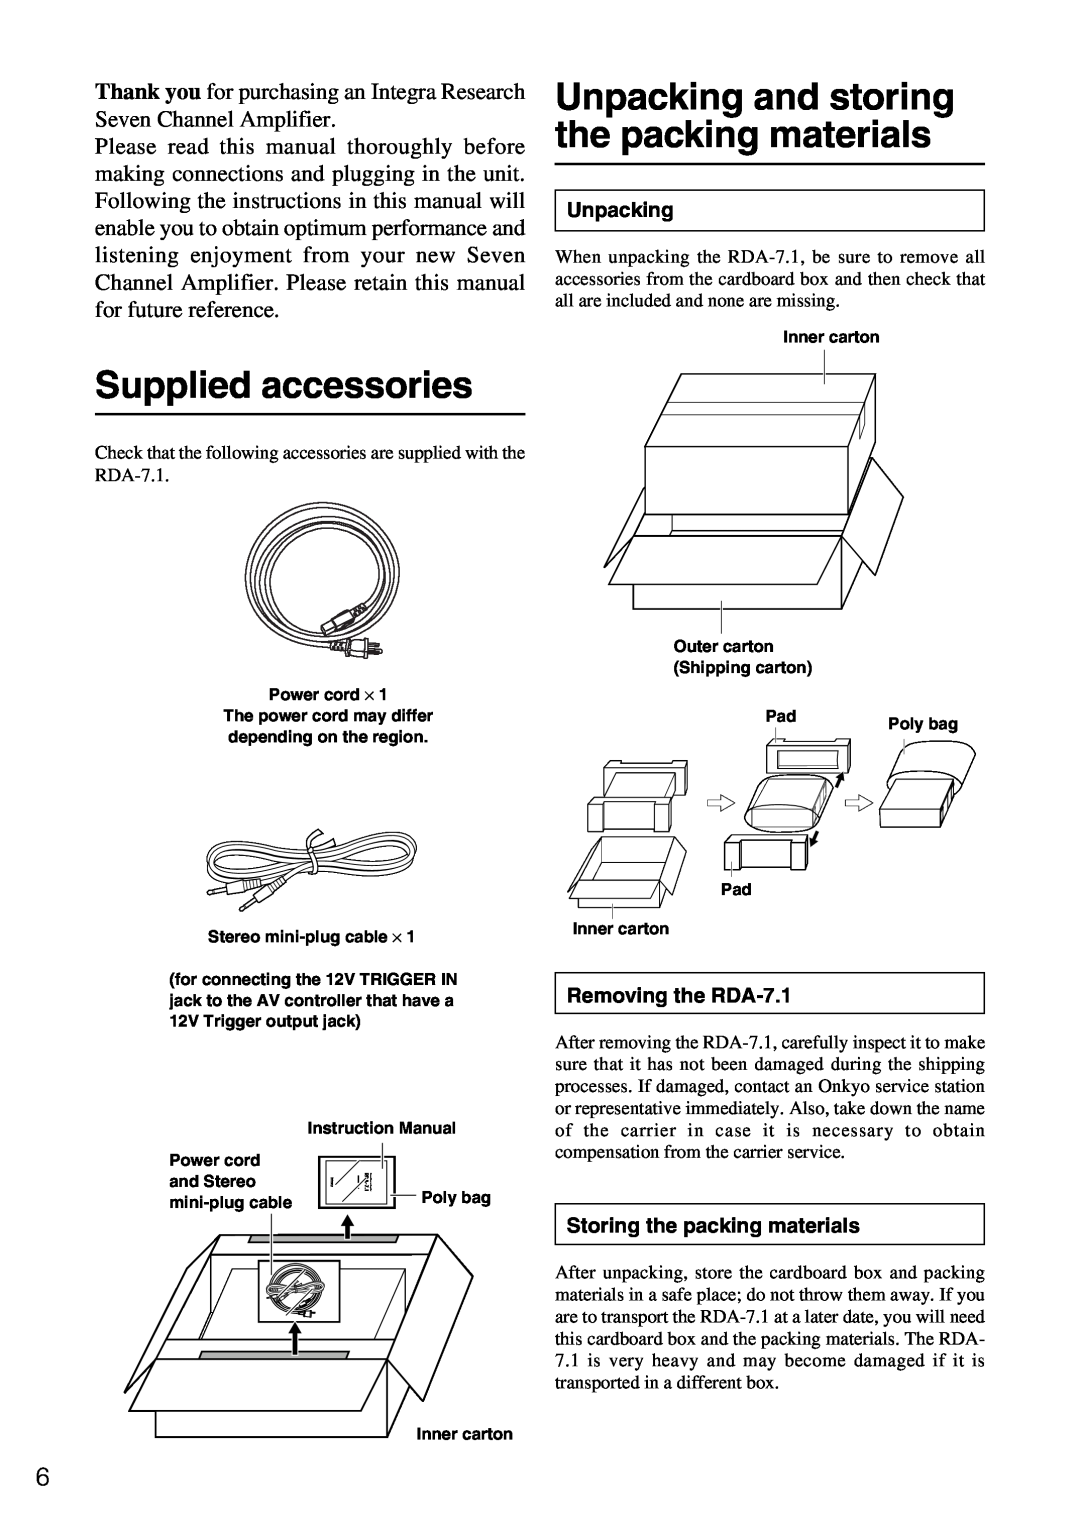 Onkyo RDA-7.1 instruction manual Supplied accessories, Unpacking and storing the packing materials 